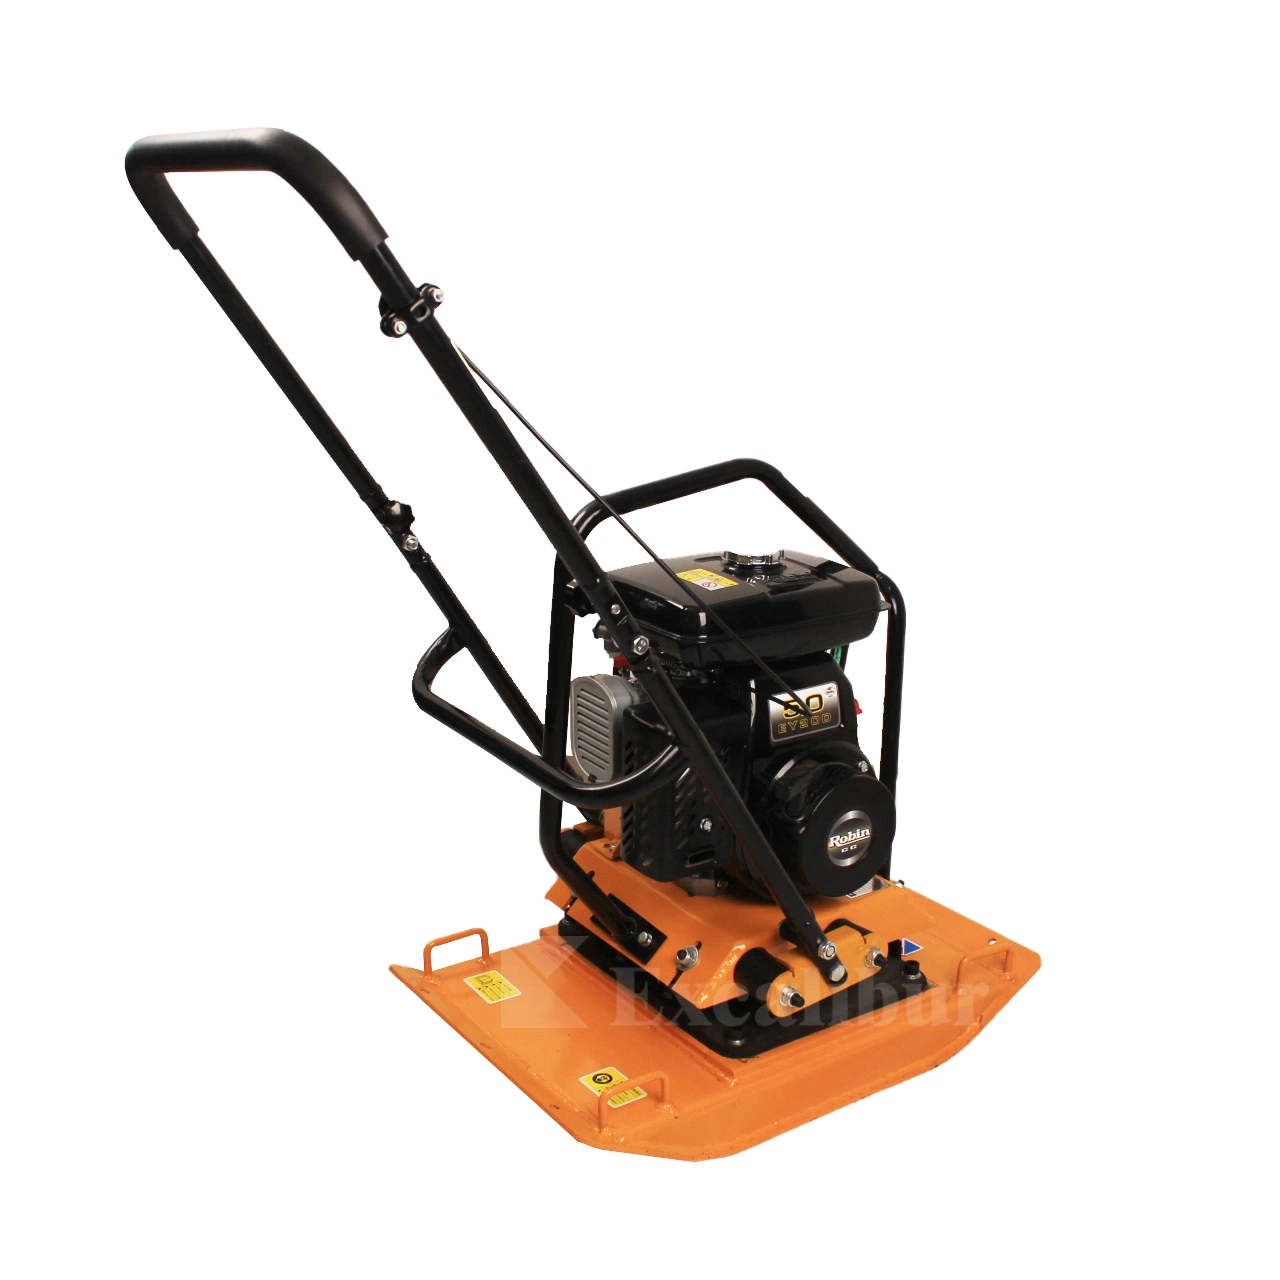 Construction Machine Vibratory Plate Compactor with Water Tank 100kg